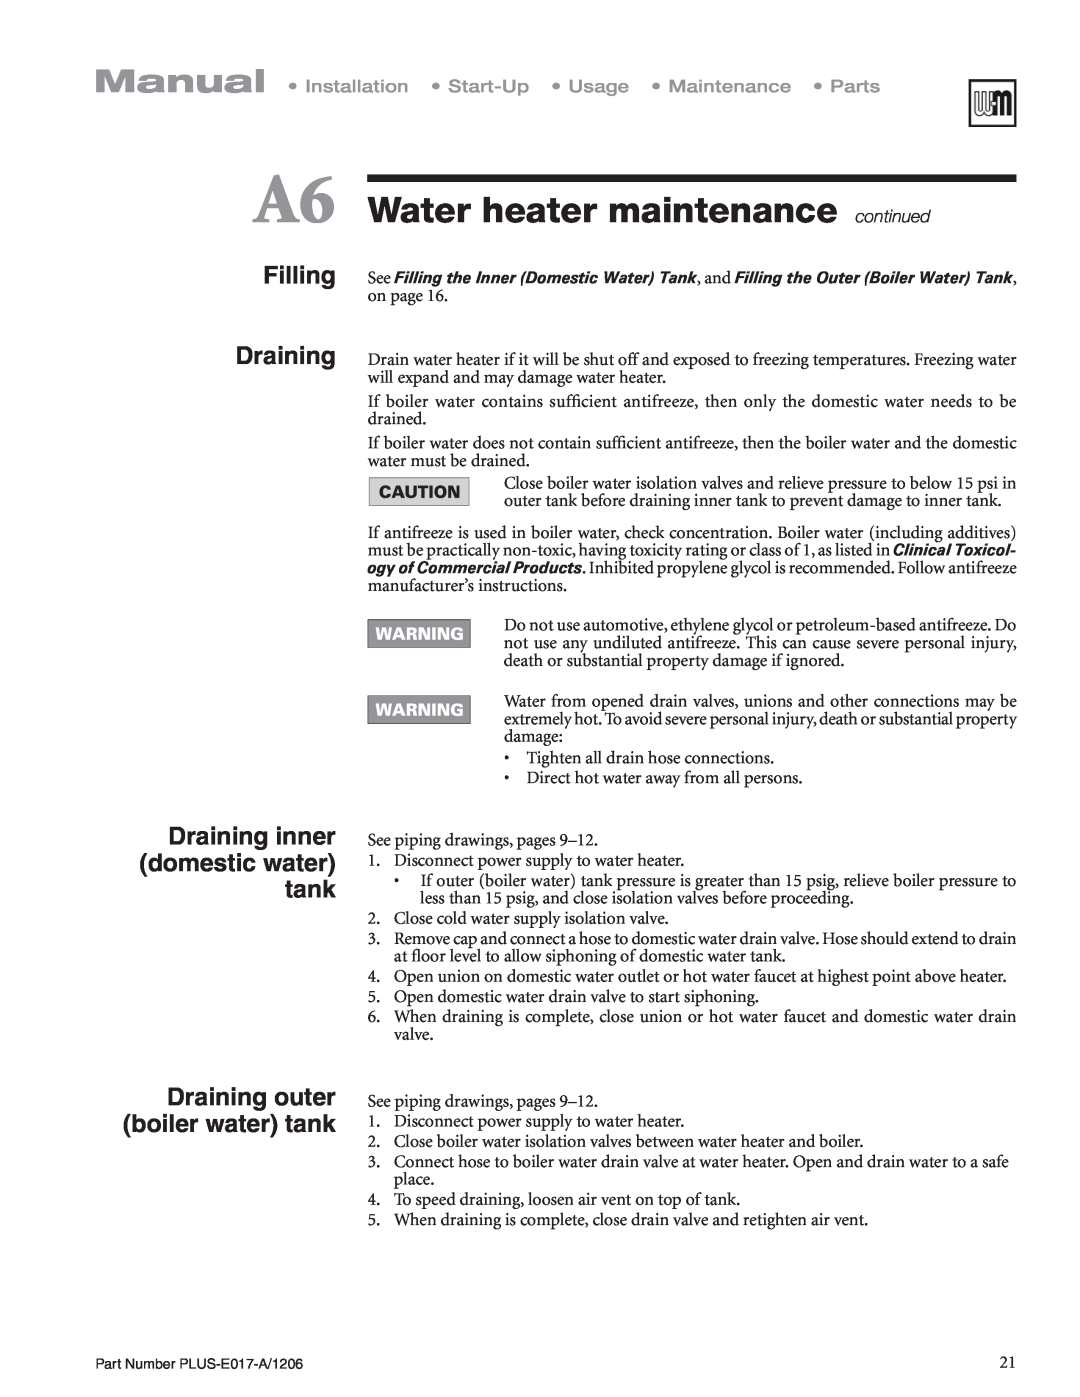 Weil-McLain PLUS-E017-A/1206 A6 Water heater maintenancecontinued, Filling Draining, Draining inner domestic water tank 